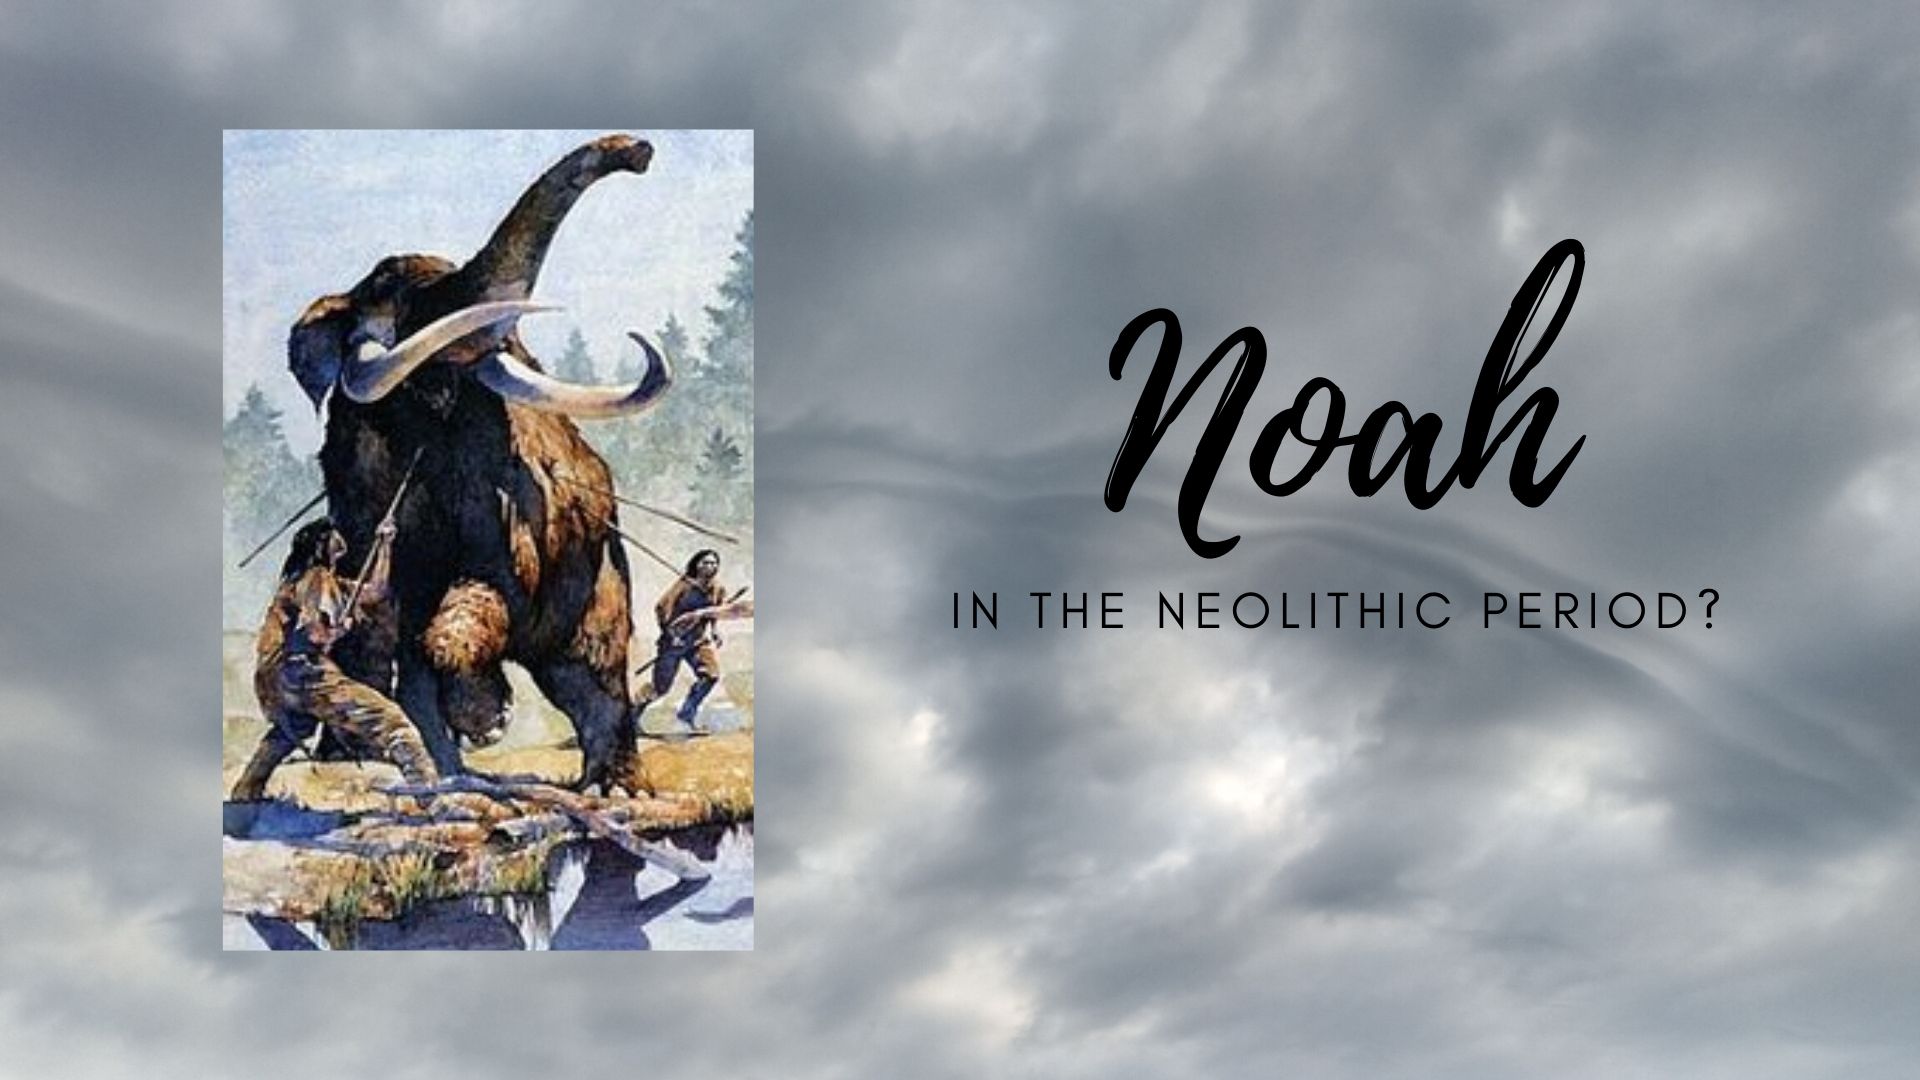 Noah during the Neolithic Period